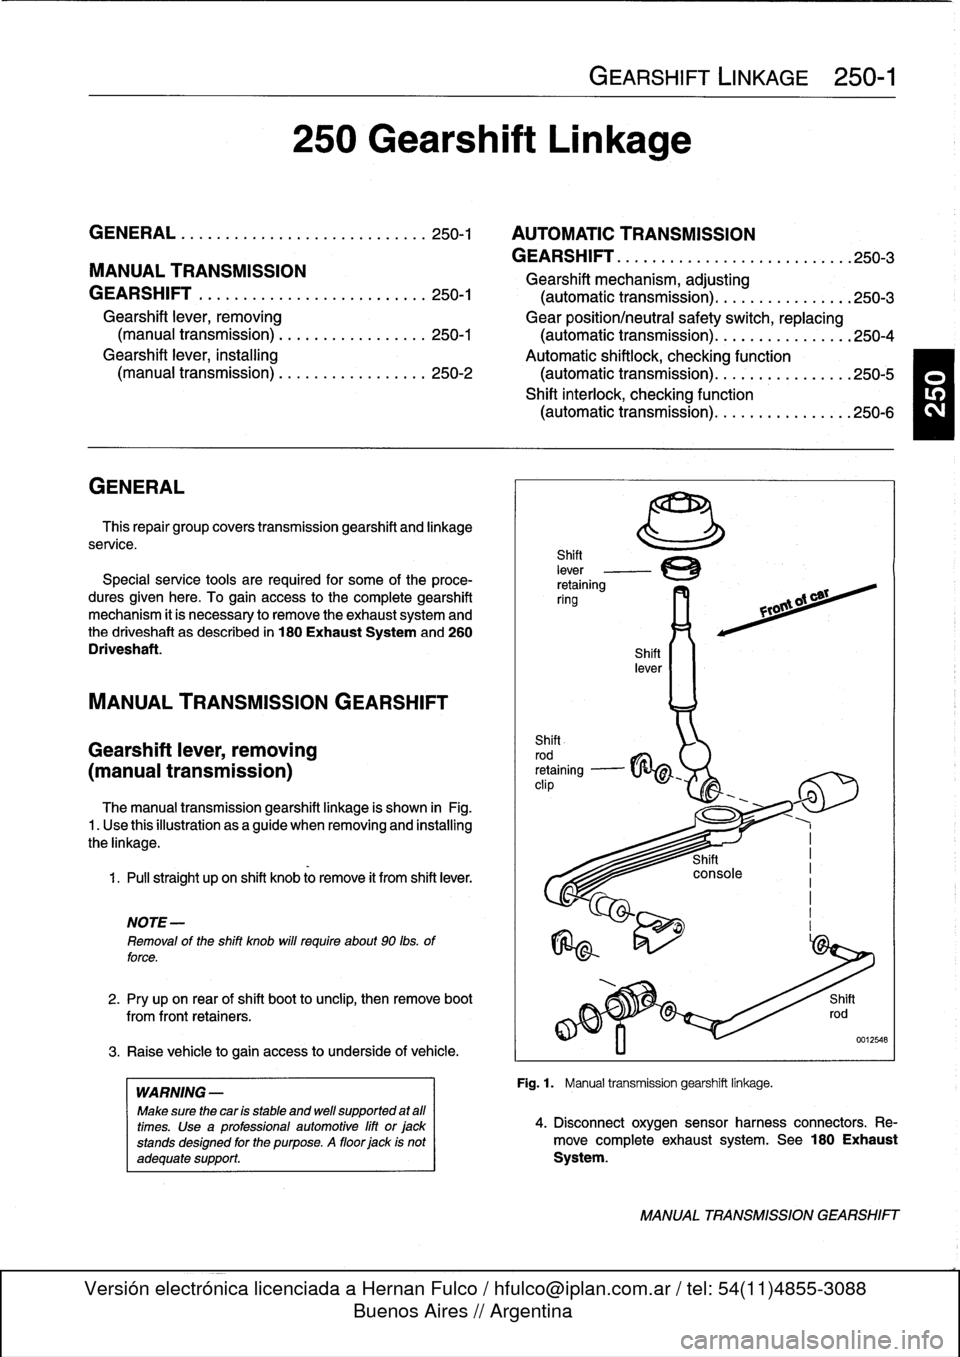 BMW 325i 1994 E36 Owners Guide 
GENERAL
.
.
.
.
.
.
.
.
.
................
.
.
.
250-1

	

AUTOMATIC
TRANSMISSION
GEARSHIFT
...
.
.........
.
.
.
.
.
.
.
.
.
.
.
.
.
.
250-3
MANUAL
TRANSMISSION

	

Gearshift
mechanism,
adjusting
GE